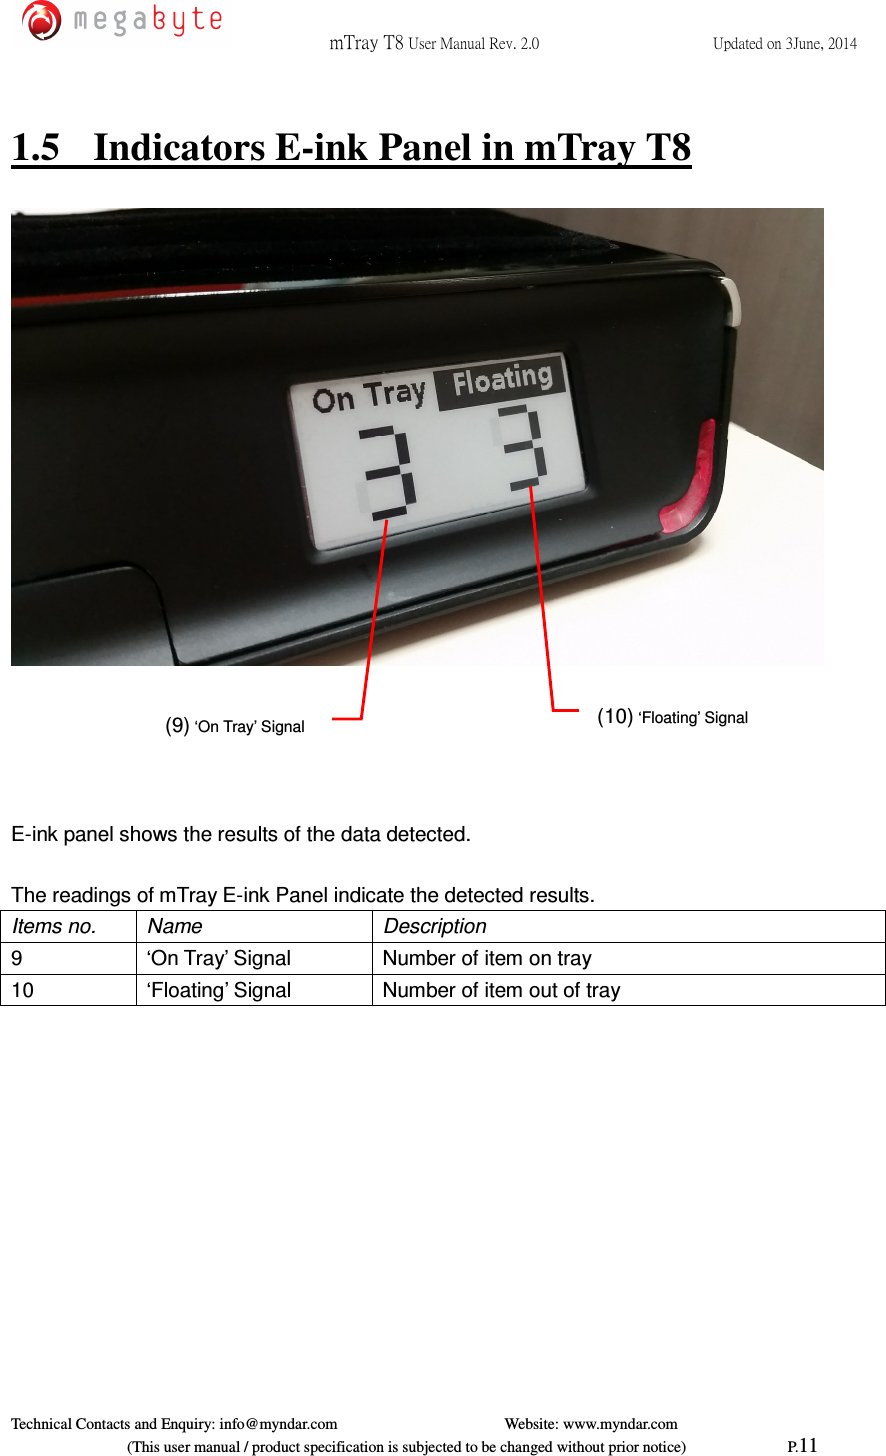  mTray T8 User Manual Rev. 2.0  Updated on 3June, 2014     Technical Contacts and Enquiry: info@myndar.com         Website: www.myndar.com                             (This user manual / product specification is subjected to be changed without prior notice)                          P.11   1.5  Indicators E-ink Panel in mTray T8        E-ink panel shows the results of the data detected.  The readings of mTray E-ink Panel indicate the detected results. Items no.  Name  Description 9  ‘On Tray’ Signal  Number of item on tray 10  ‘Floating’ Signal  Number of item out of tray (10) ‘Floating’ Signal (9) ‘On Tray’ Signal 